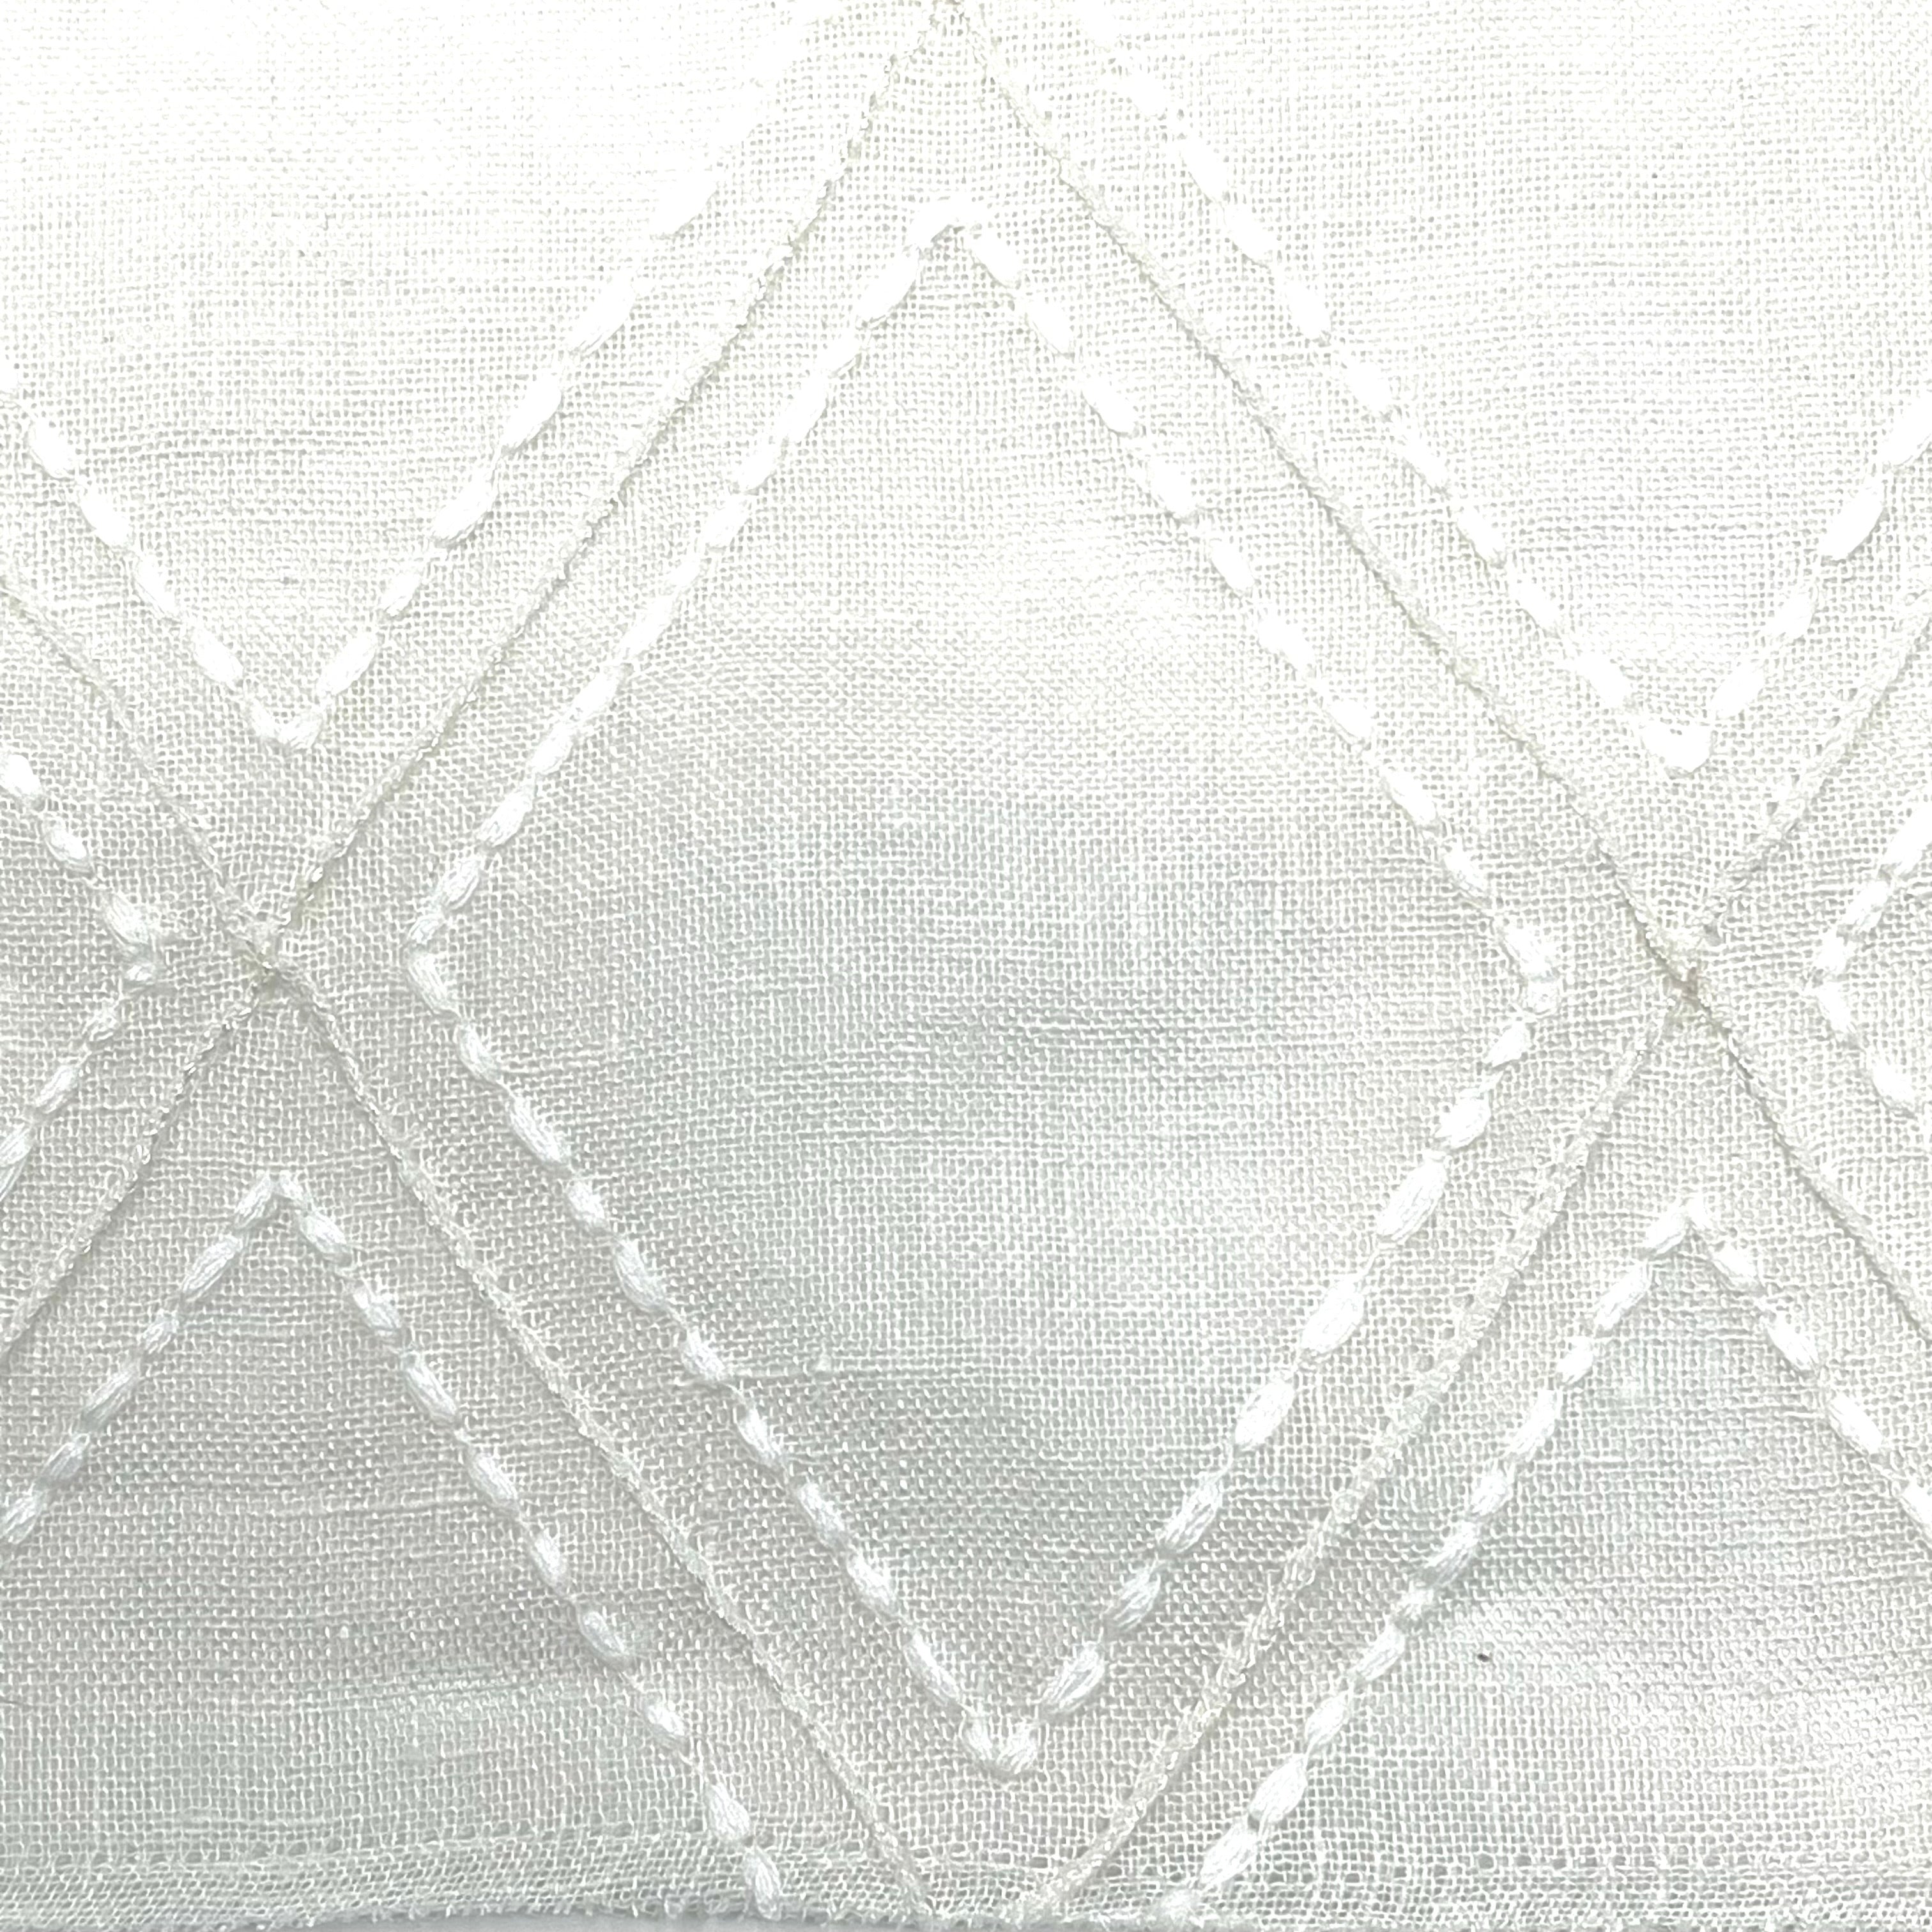 Geometric Blended Linen Fabric By The Yard, Curtain, Drapery, Table Top, 54" Width/CL1078